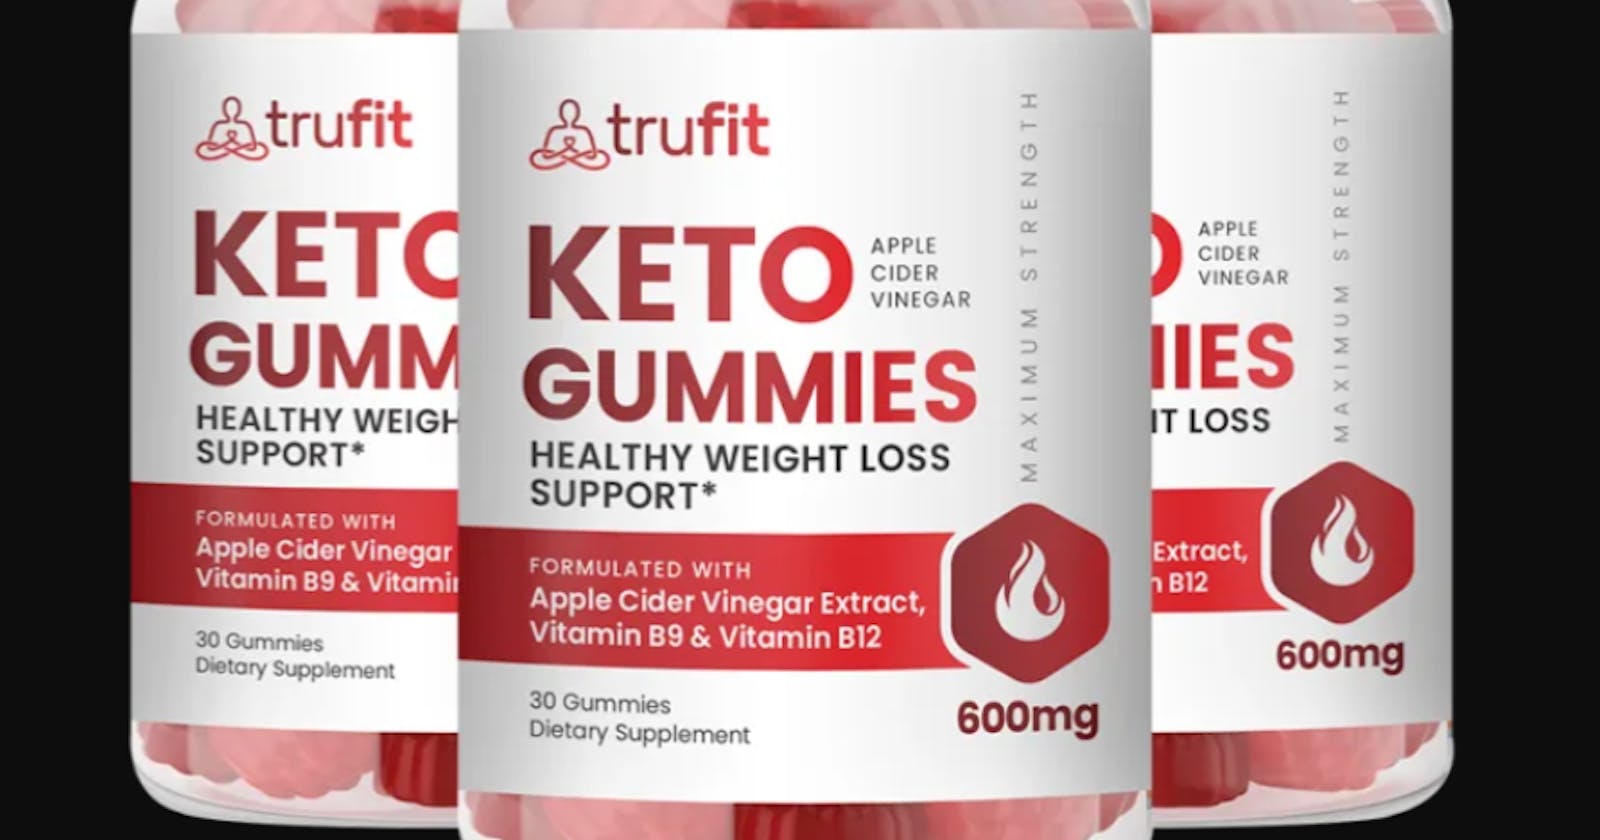 Trufit Keto Gummies For Weight Loss?